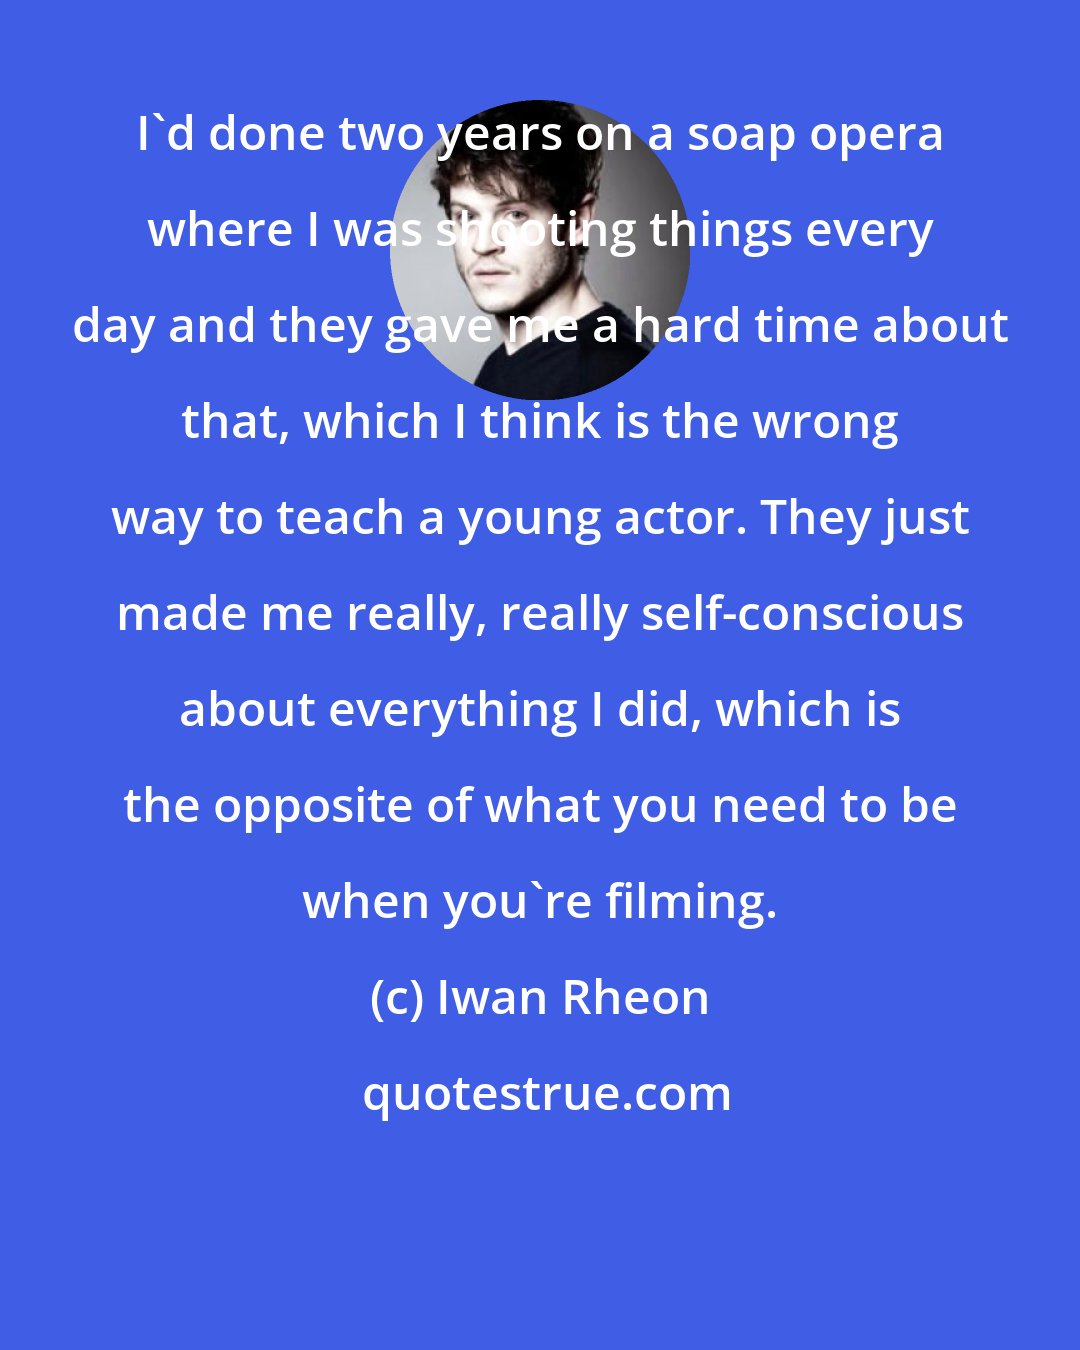 Iwan Rheon: I'd done two years on a soap opera where I was shooting things every day and they gave me a hard time about that, which I think is the wrong way to teach a young actor. They just made me really, really self-conscious about everything I did, which is the opposite of what you need to be when you're filming.